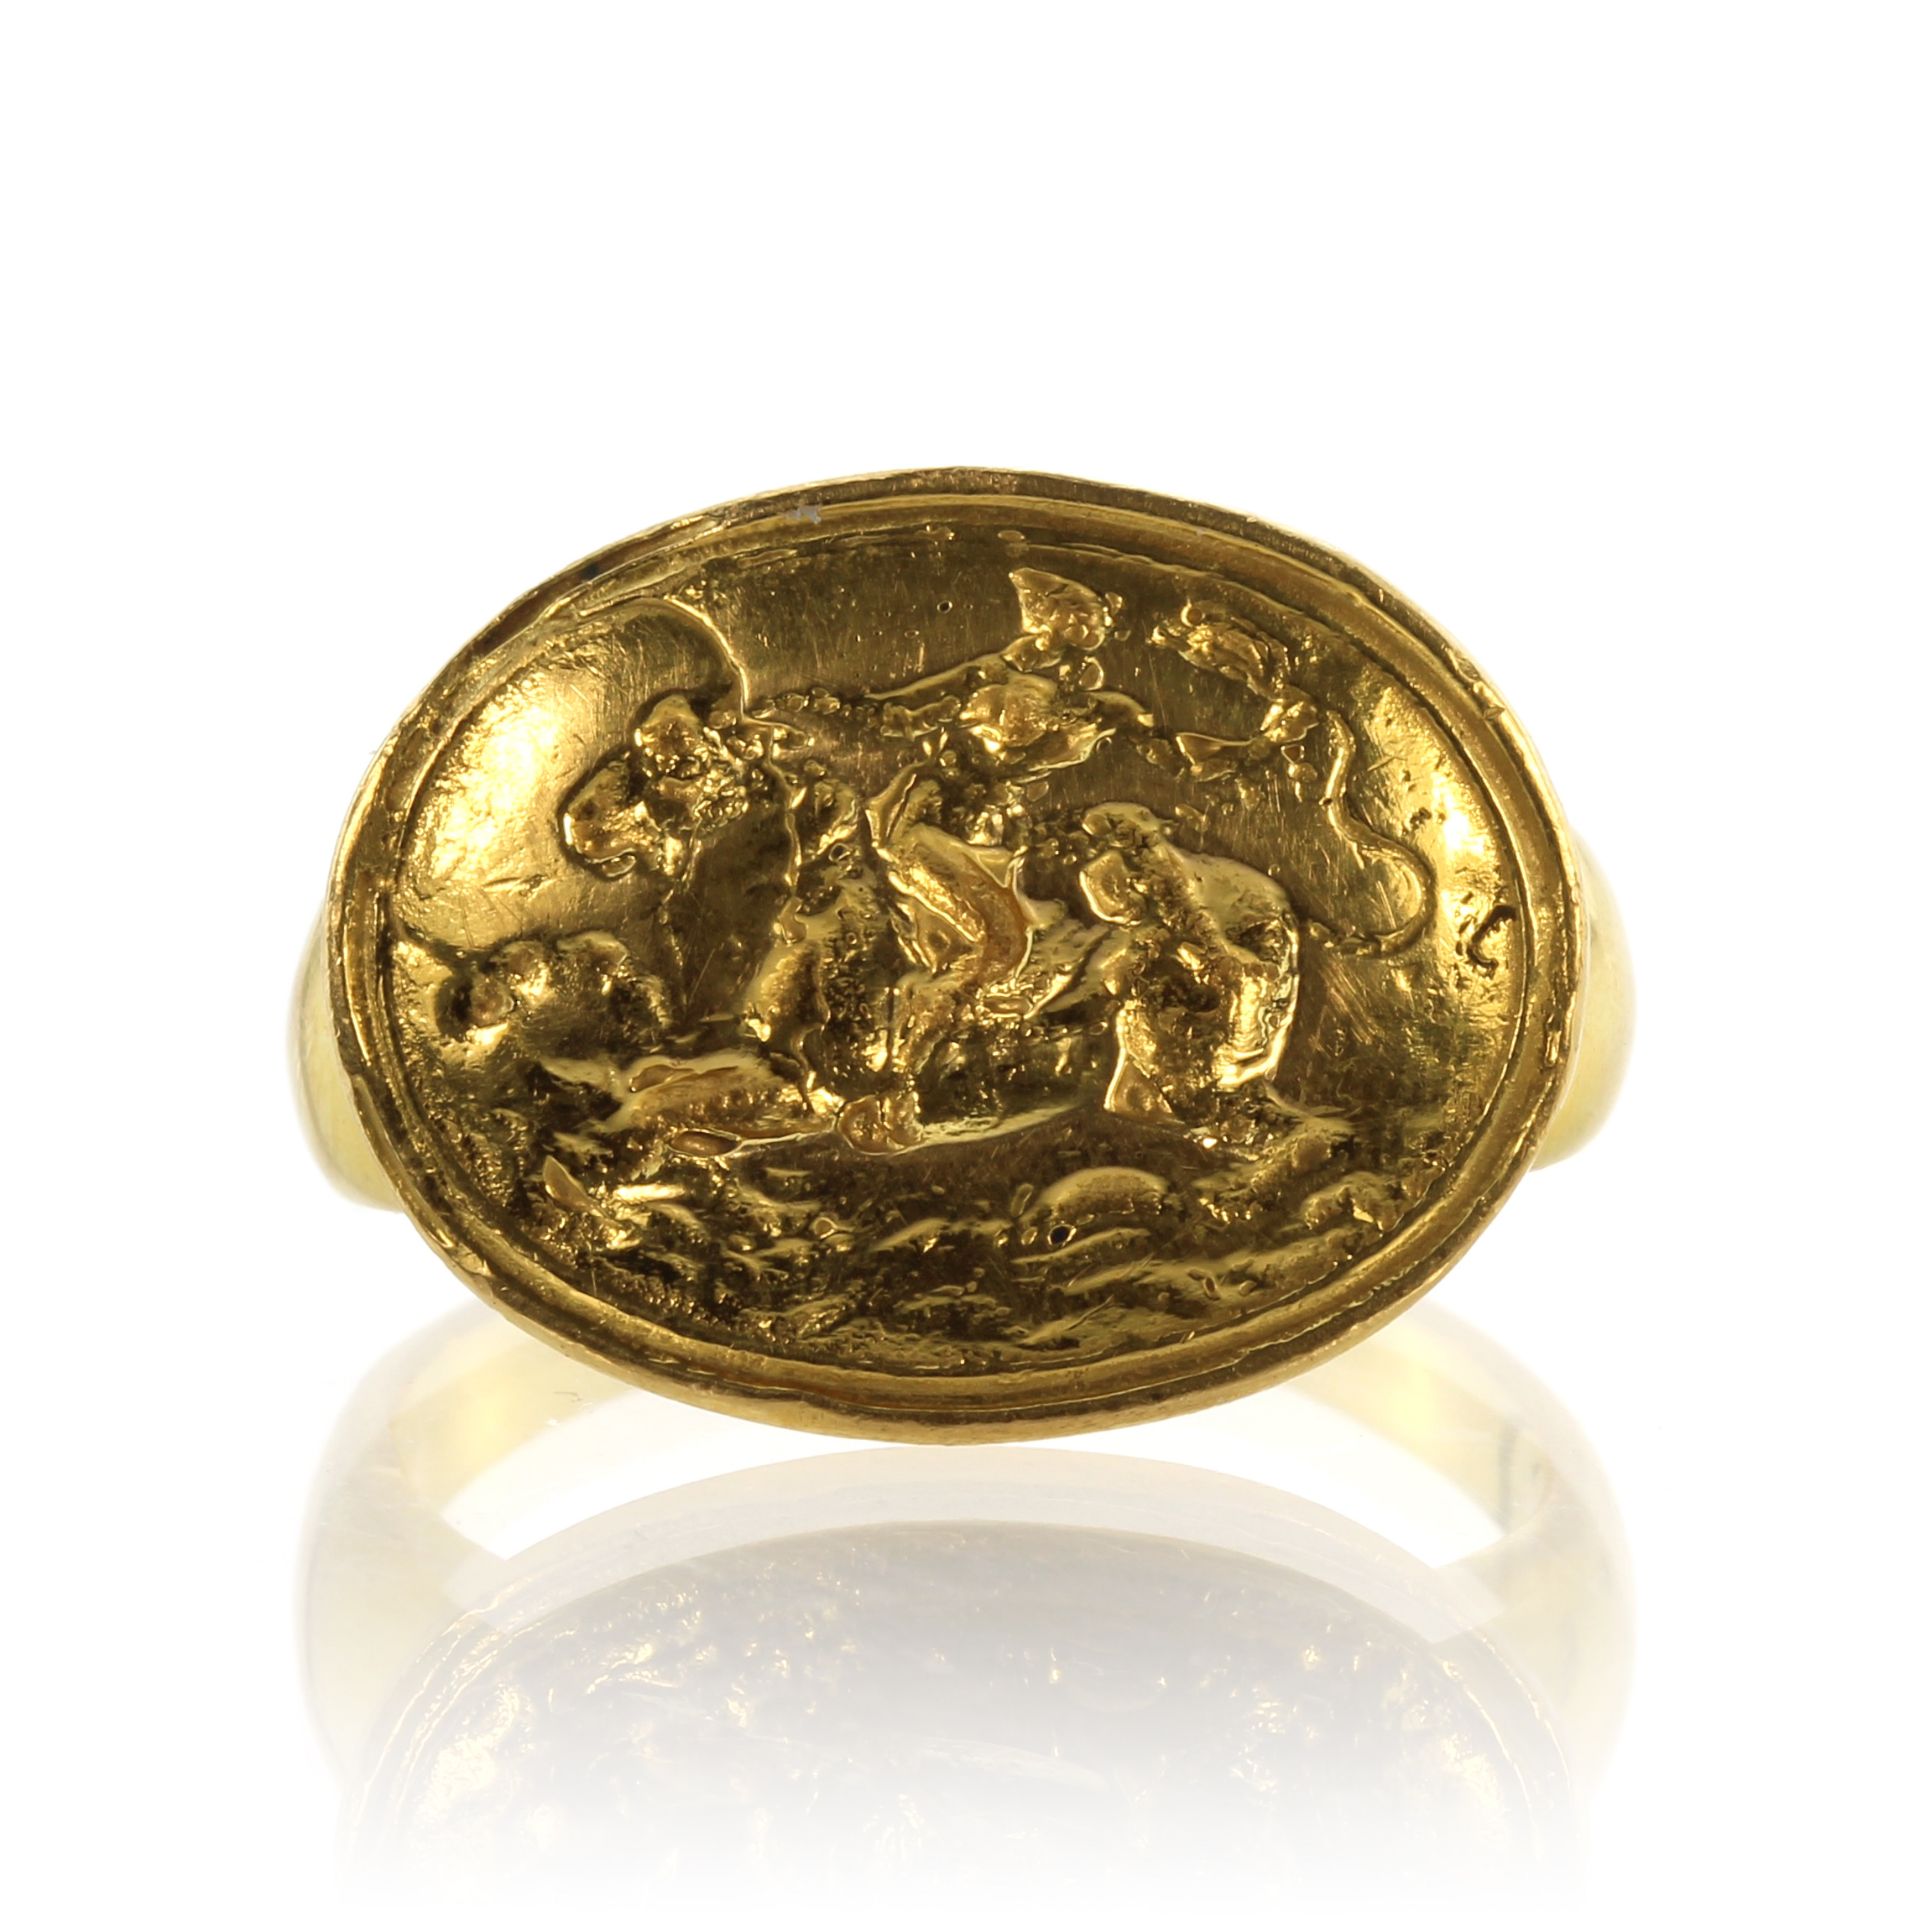 A 5th Century Minoan style intaglio ring in 22ct yellow gold designed as a large oval seal face